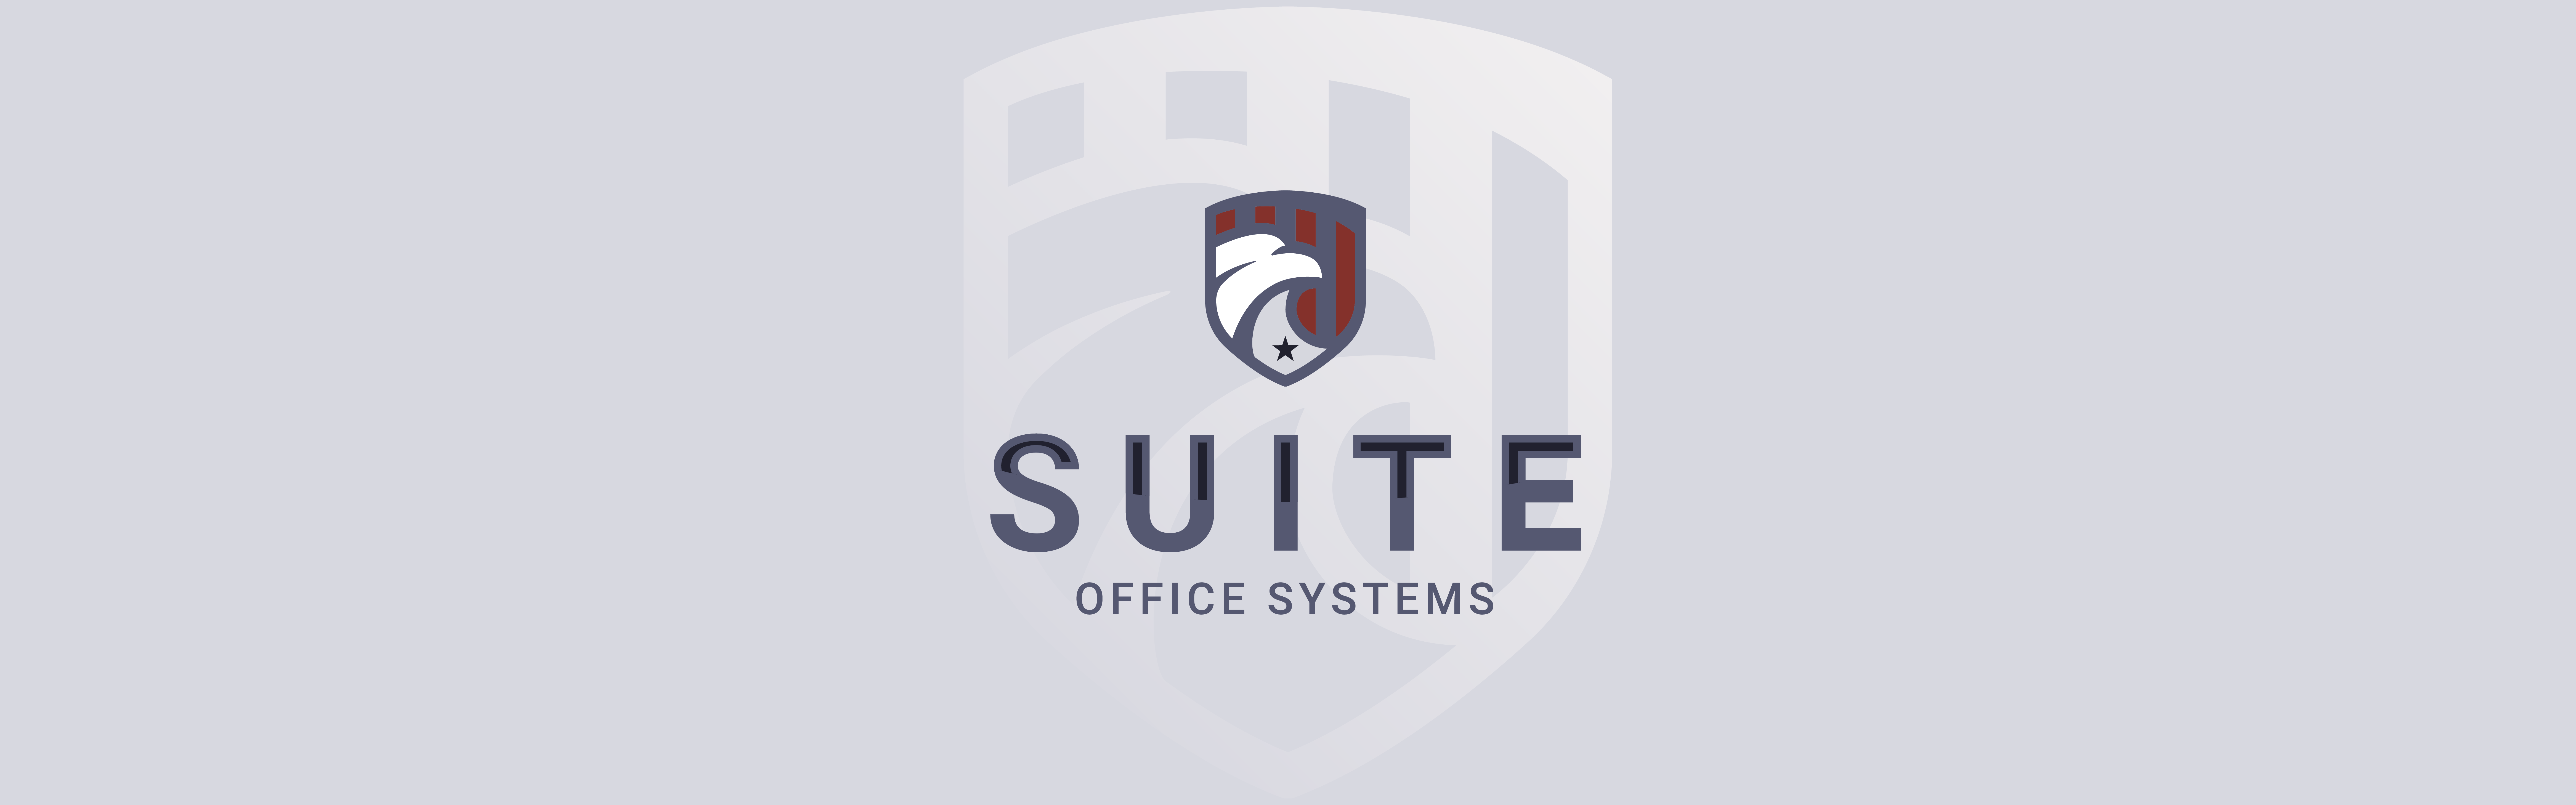 Logo of Suite Office Systems featuring a shield emblem with a knight's helmet, set against a pale background.